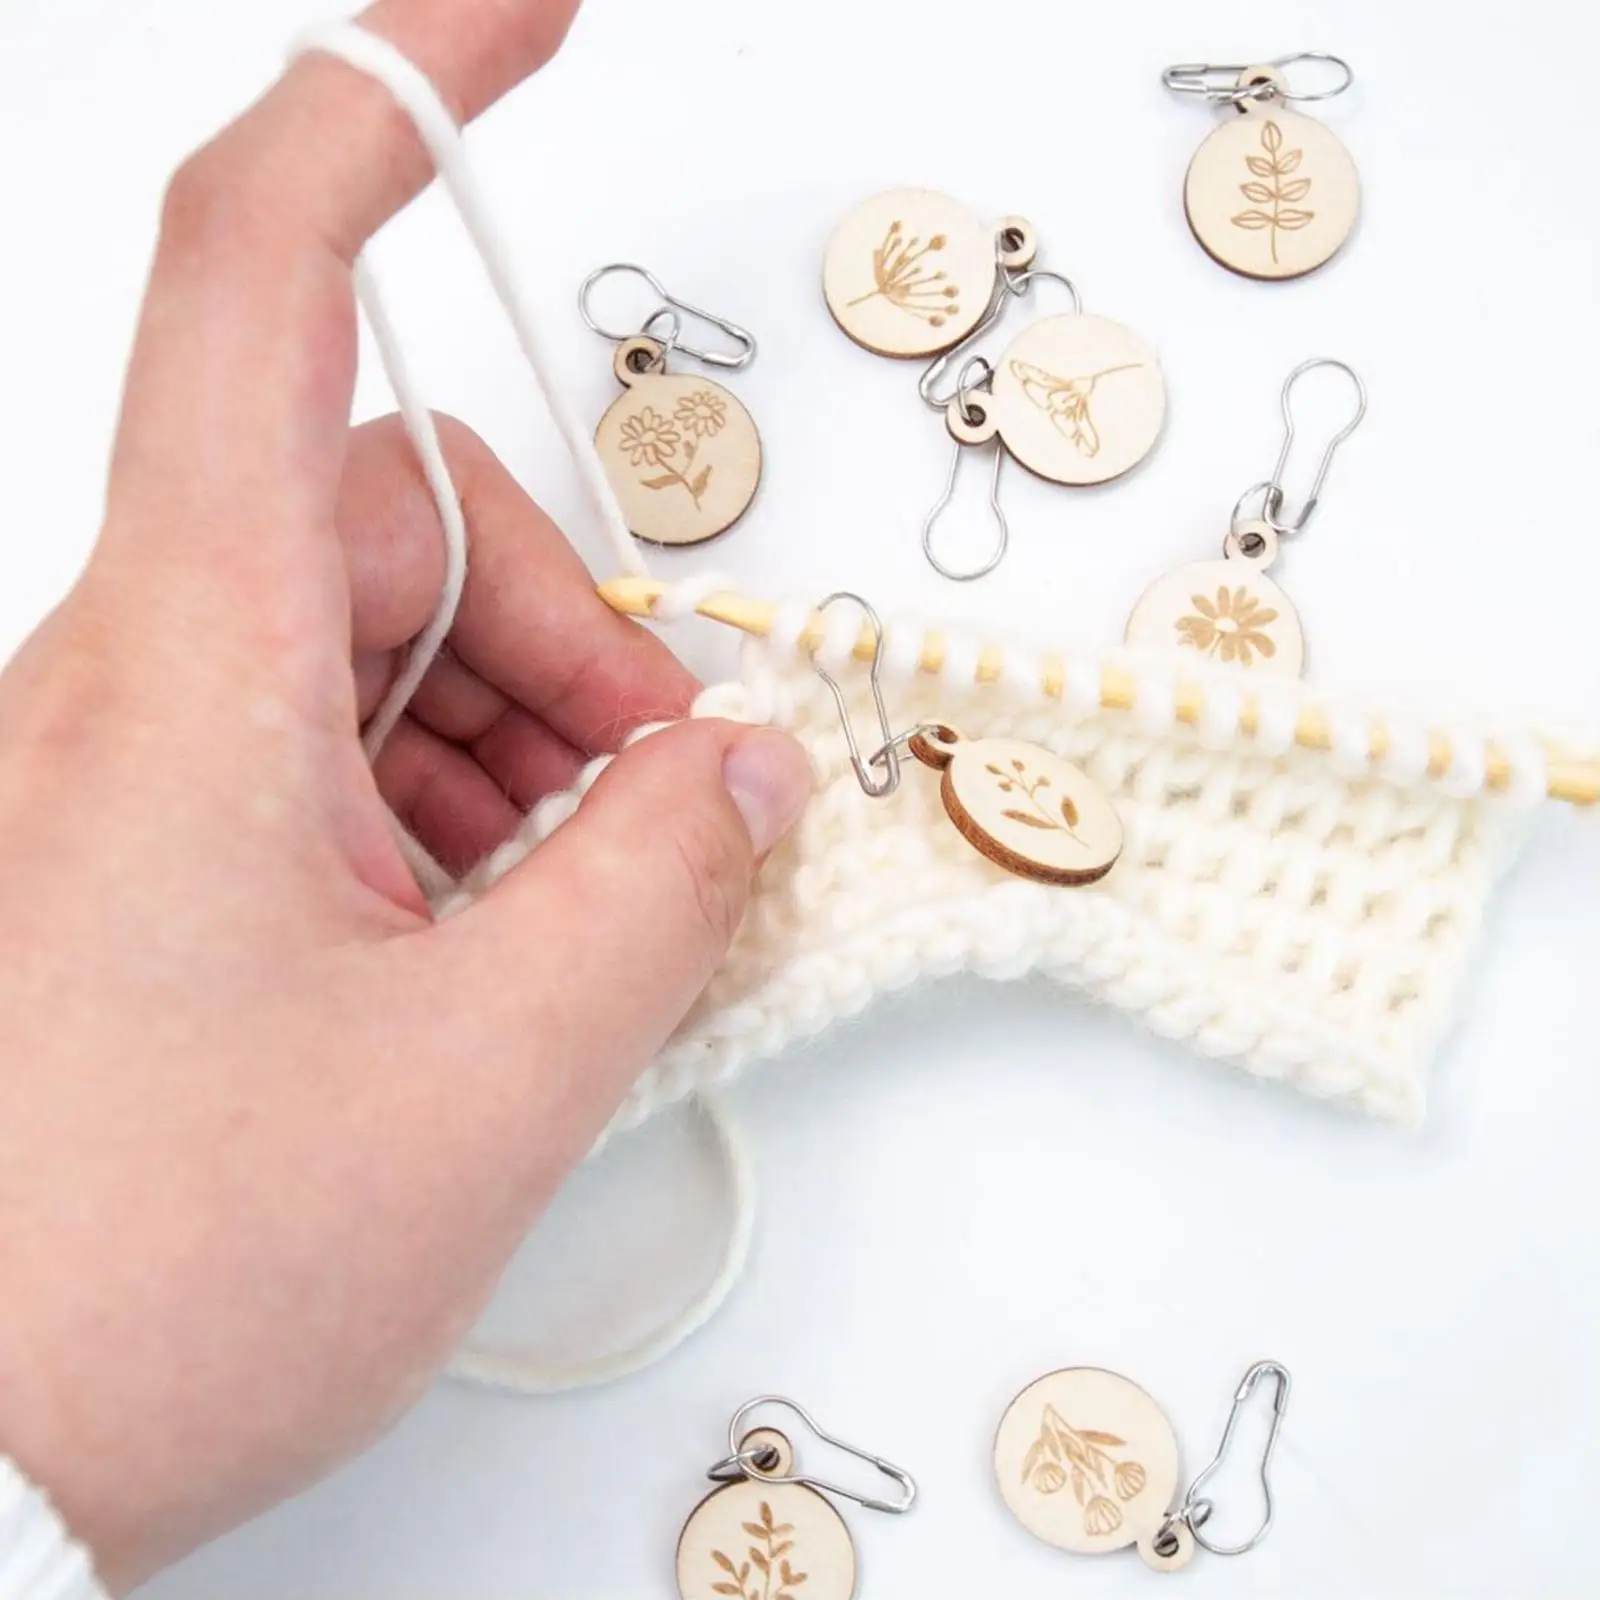 8 Pcs Knitting Stitch Markers Round Crochet Latch Removable for Weaving